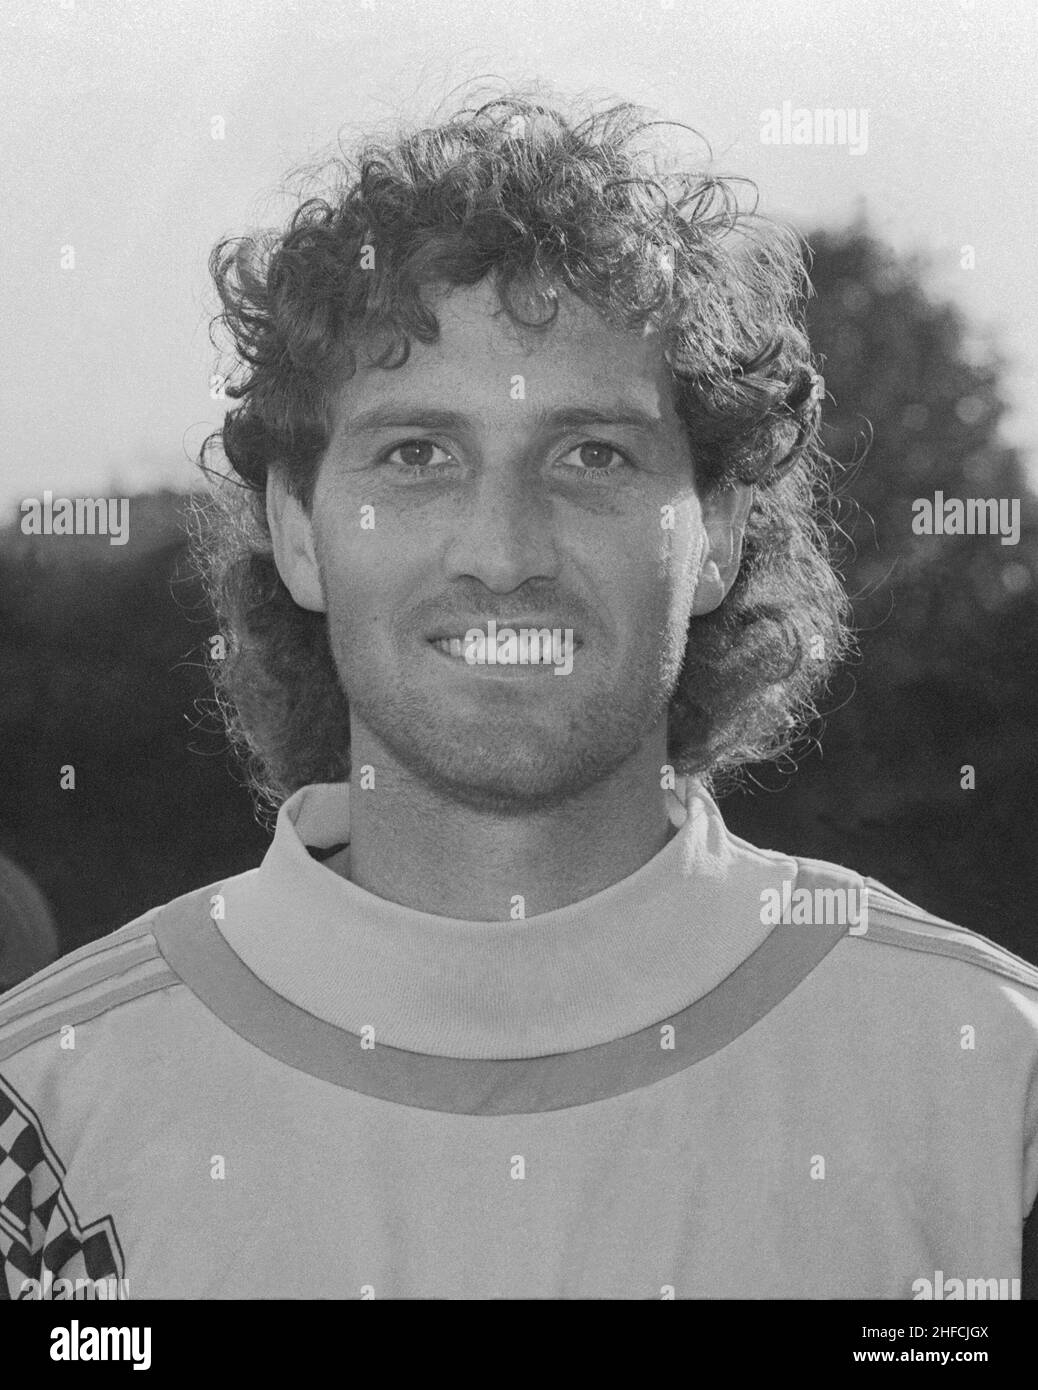 GILLES ROUSSET Goalkeeper football Lyon and France National team to European Championship 1992 in Sweden Stock Photo